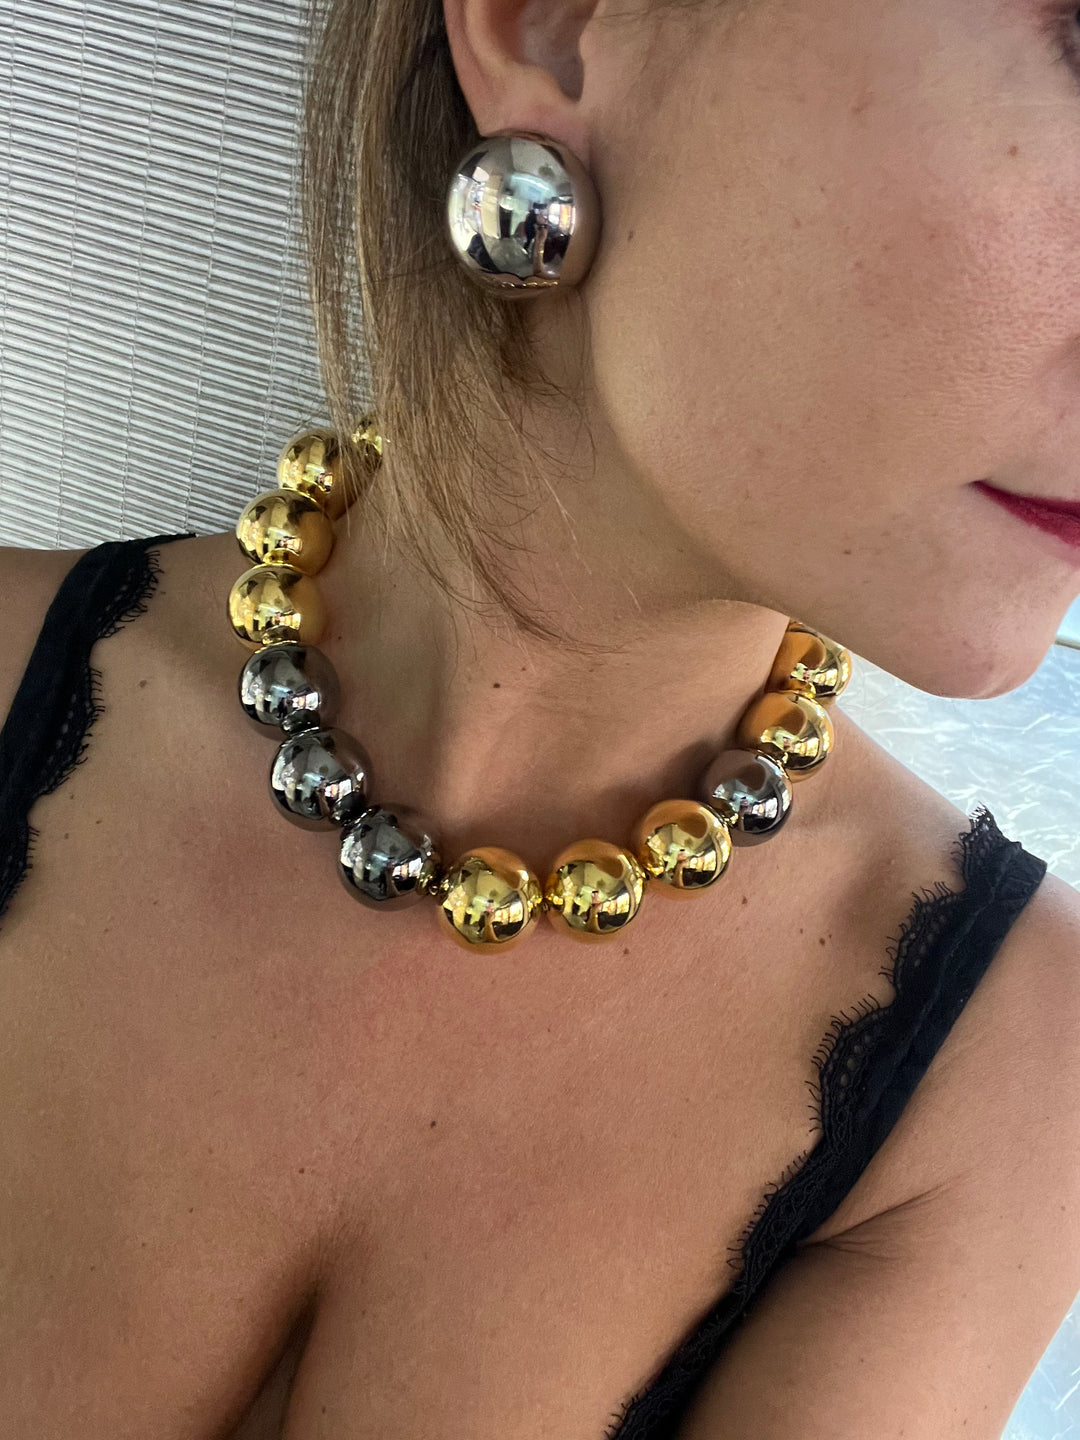 Federica Rossi necklace Bon Bon Bon balls round neck plated 18kt yellow gold and ruthenium FR.CO.09